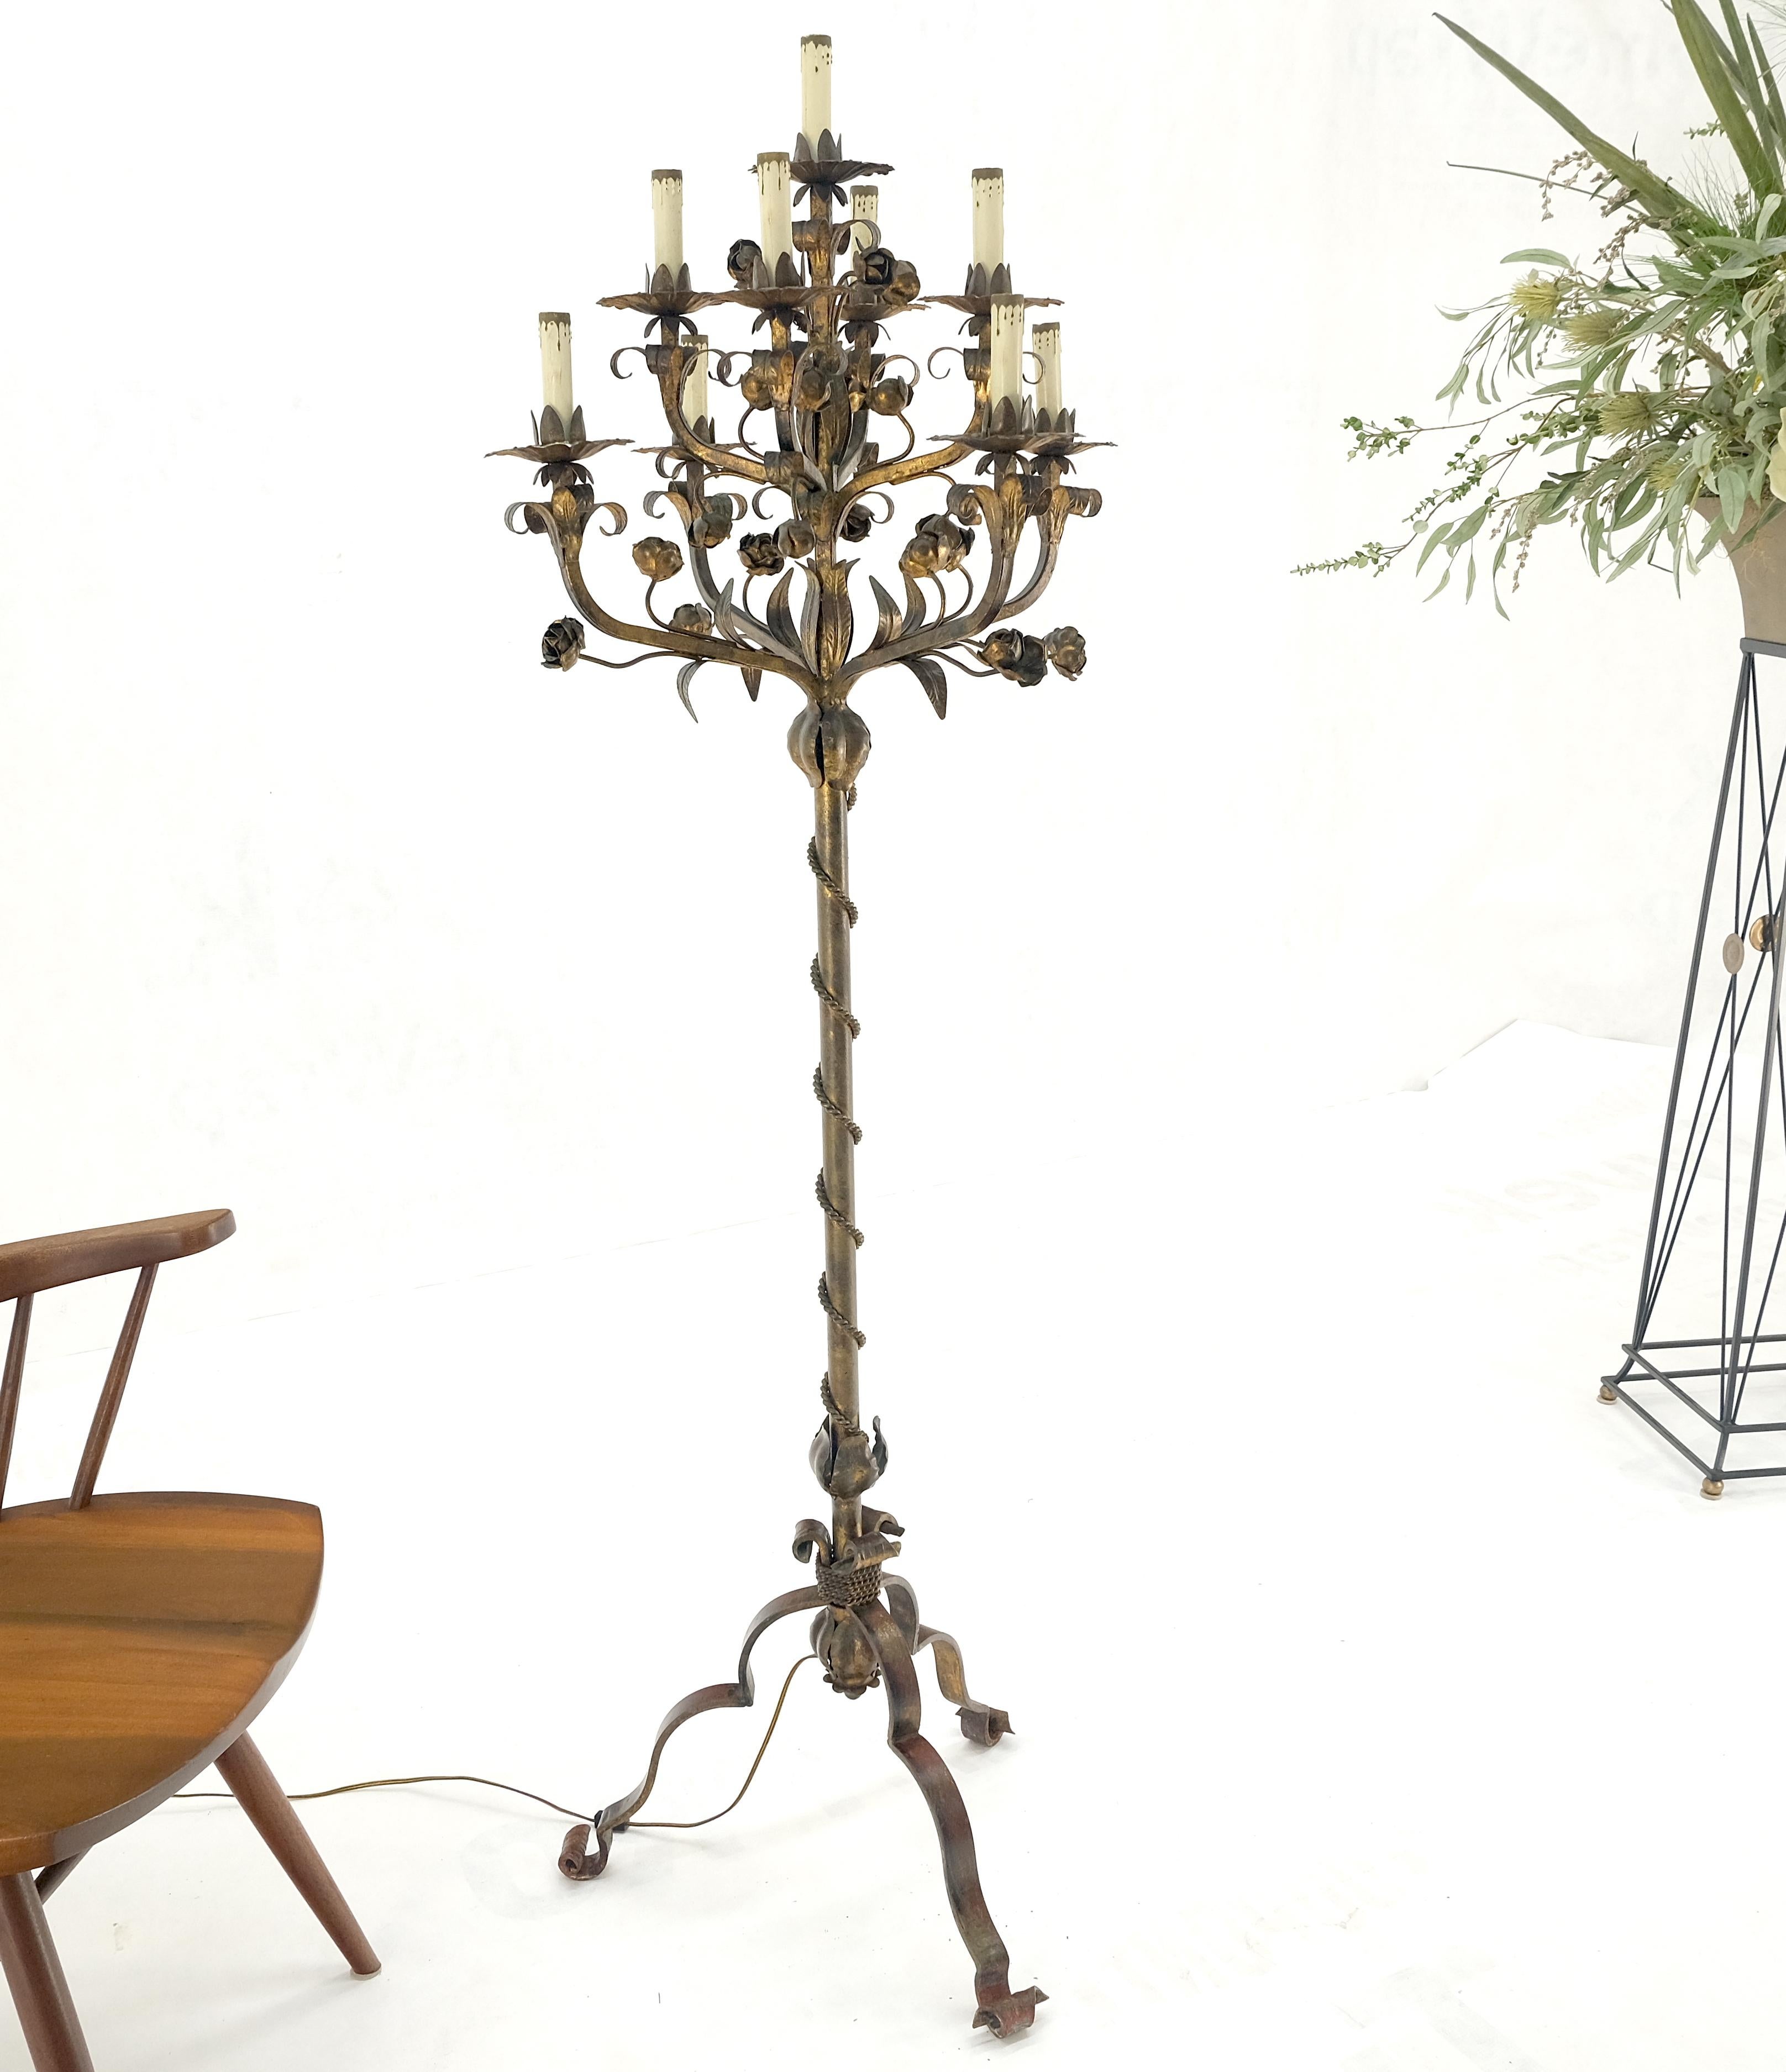 Wrought Iron Candelabra Forged Golt Gilt Metal Flowers & Leafs Motive Italian Floor Lamp NICE For Sale